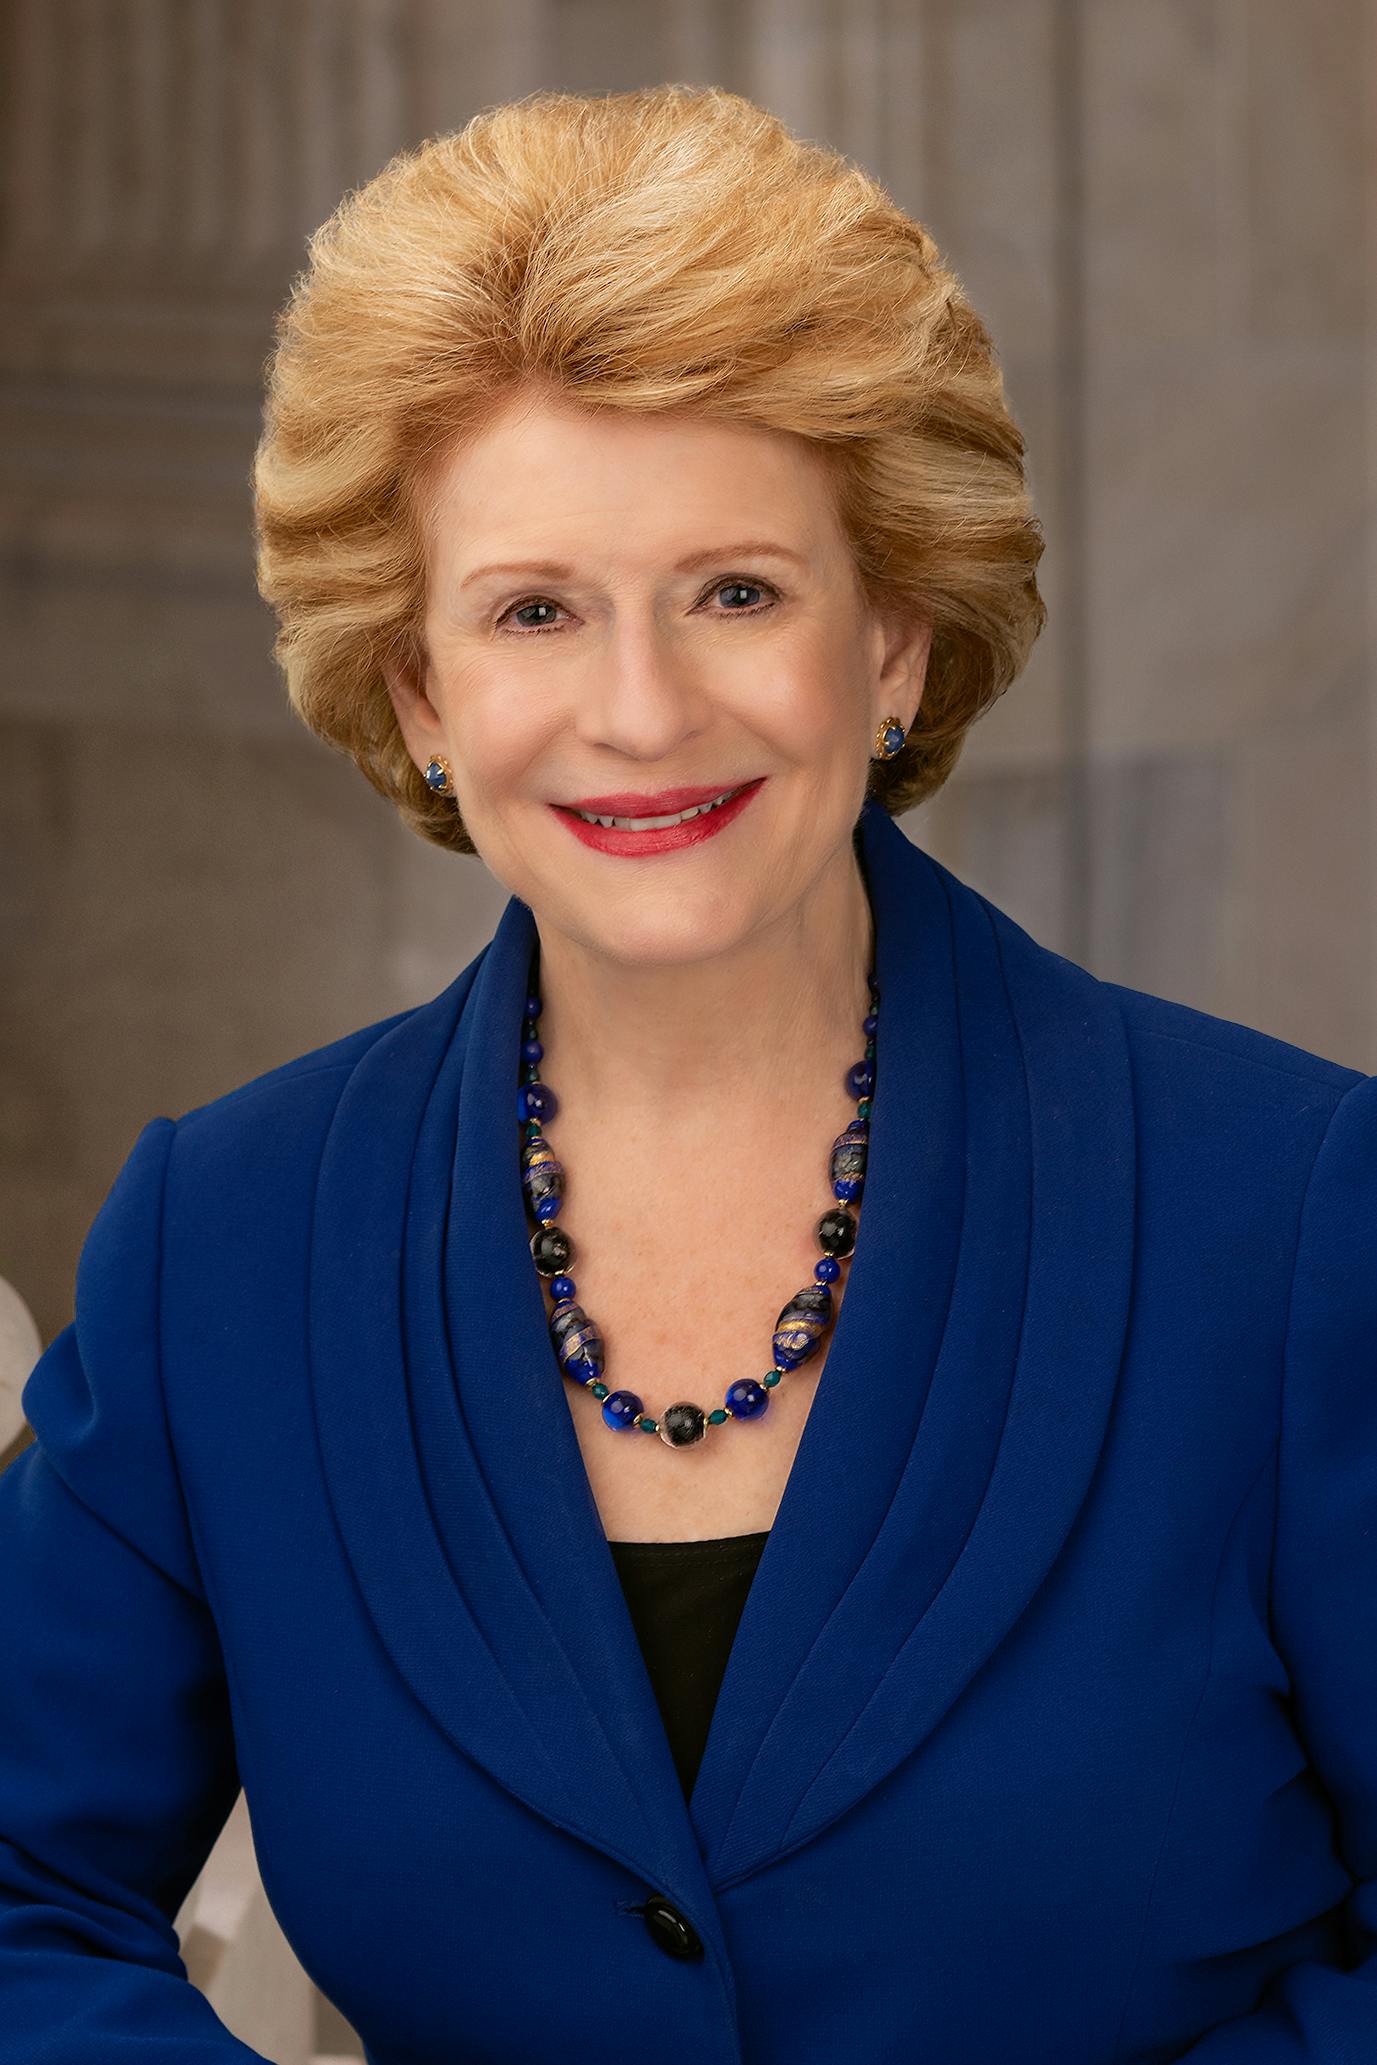 Profile picture of Debbie Stabenow